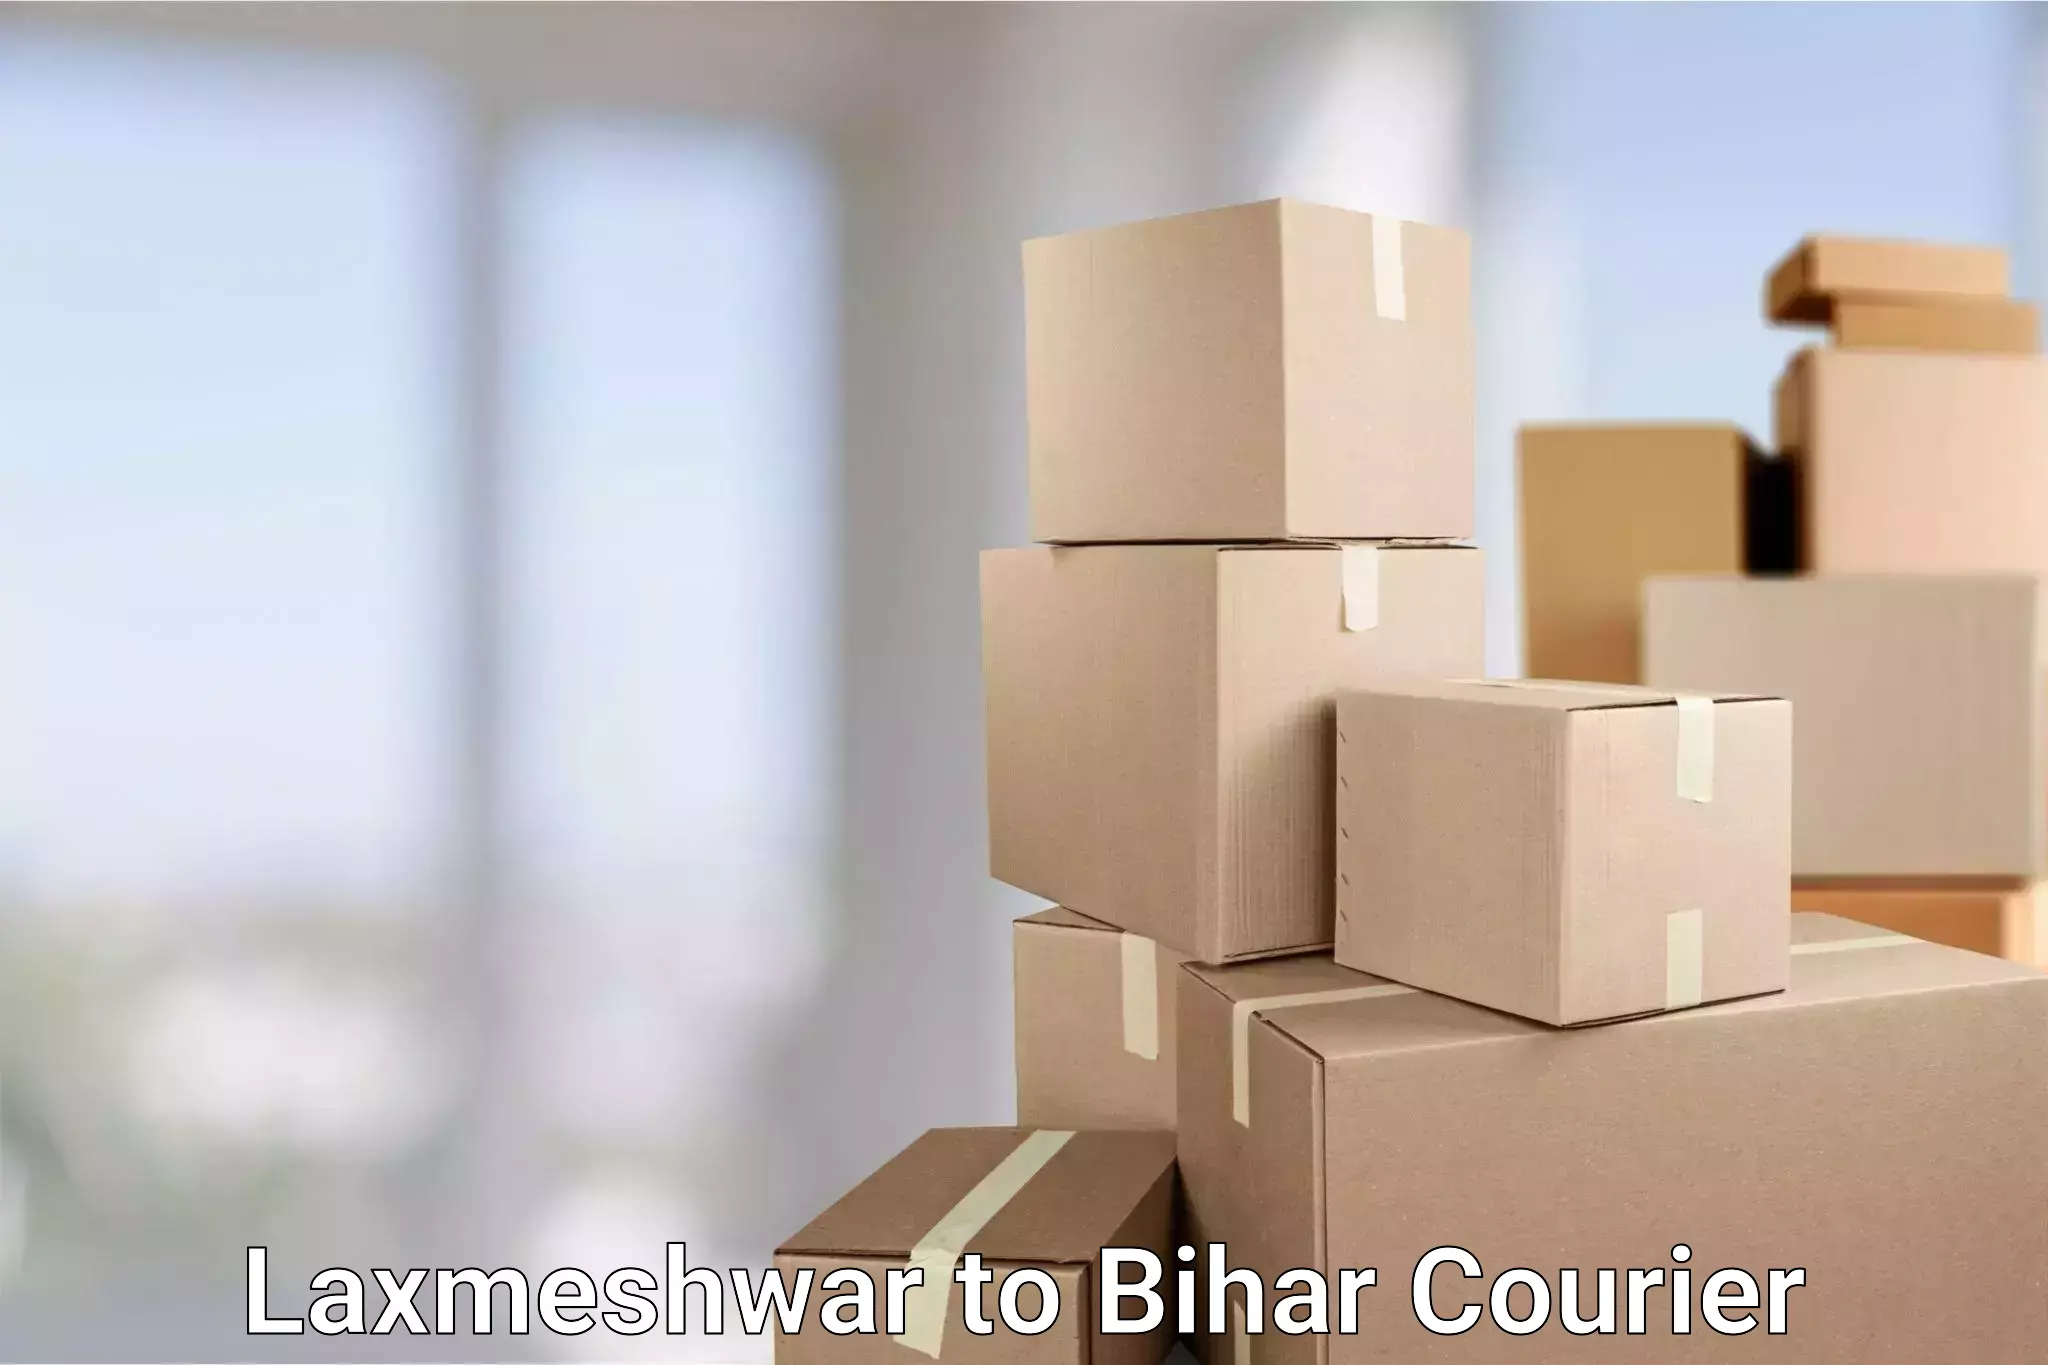 Reliable courier services in Laxmeshwar to Mahaddipur